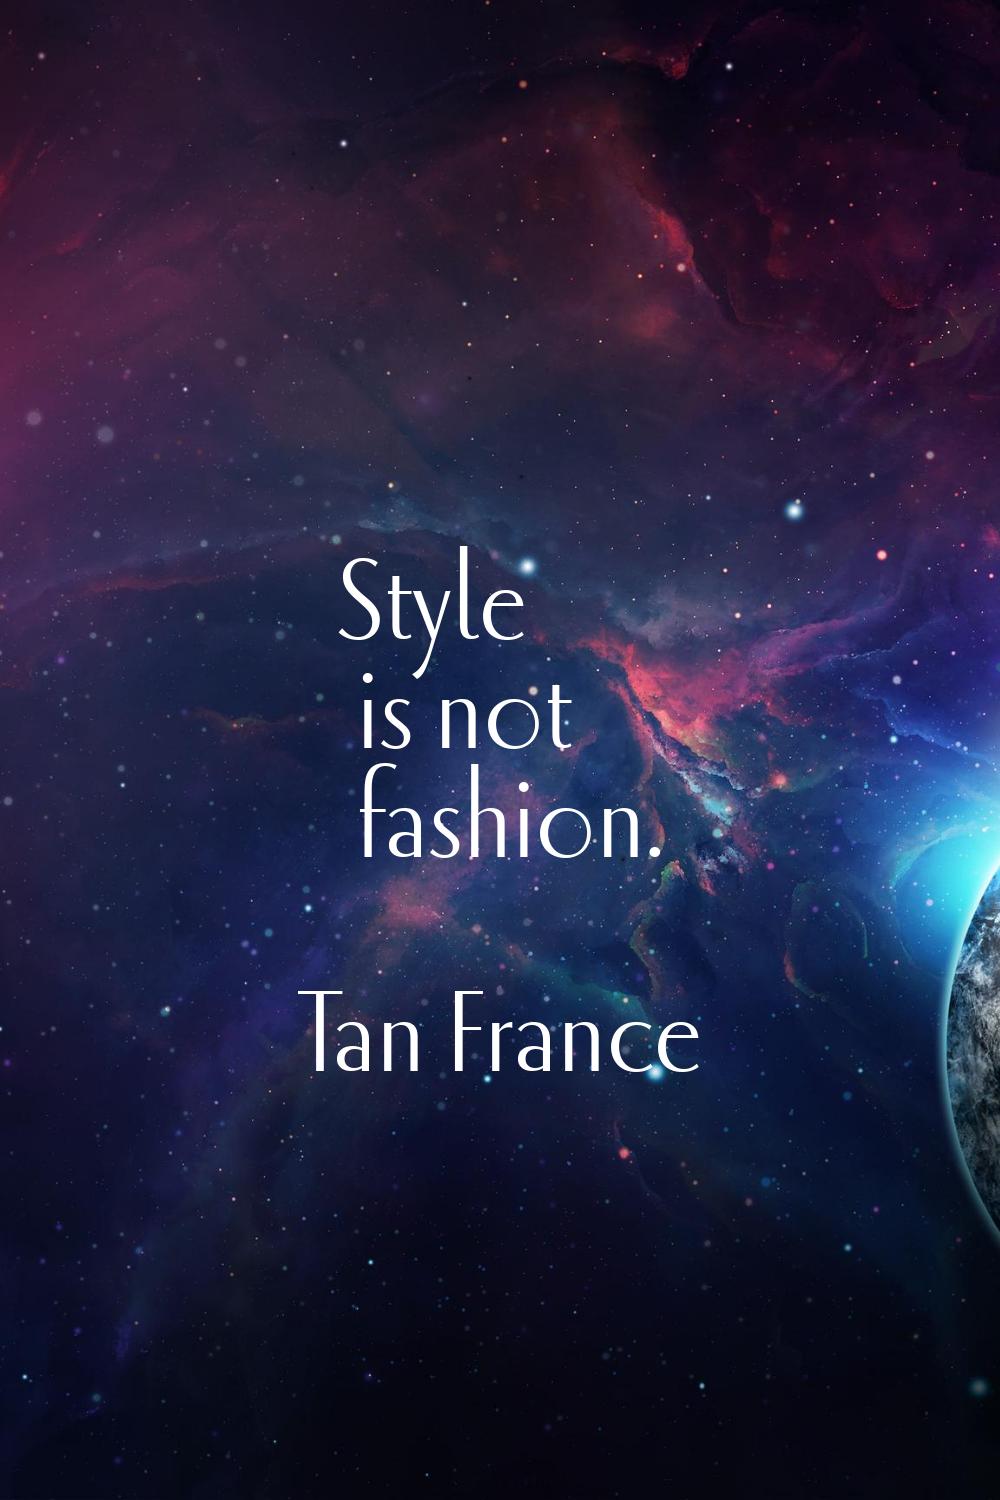 Style is not fashion.